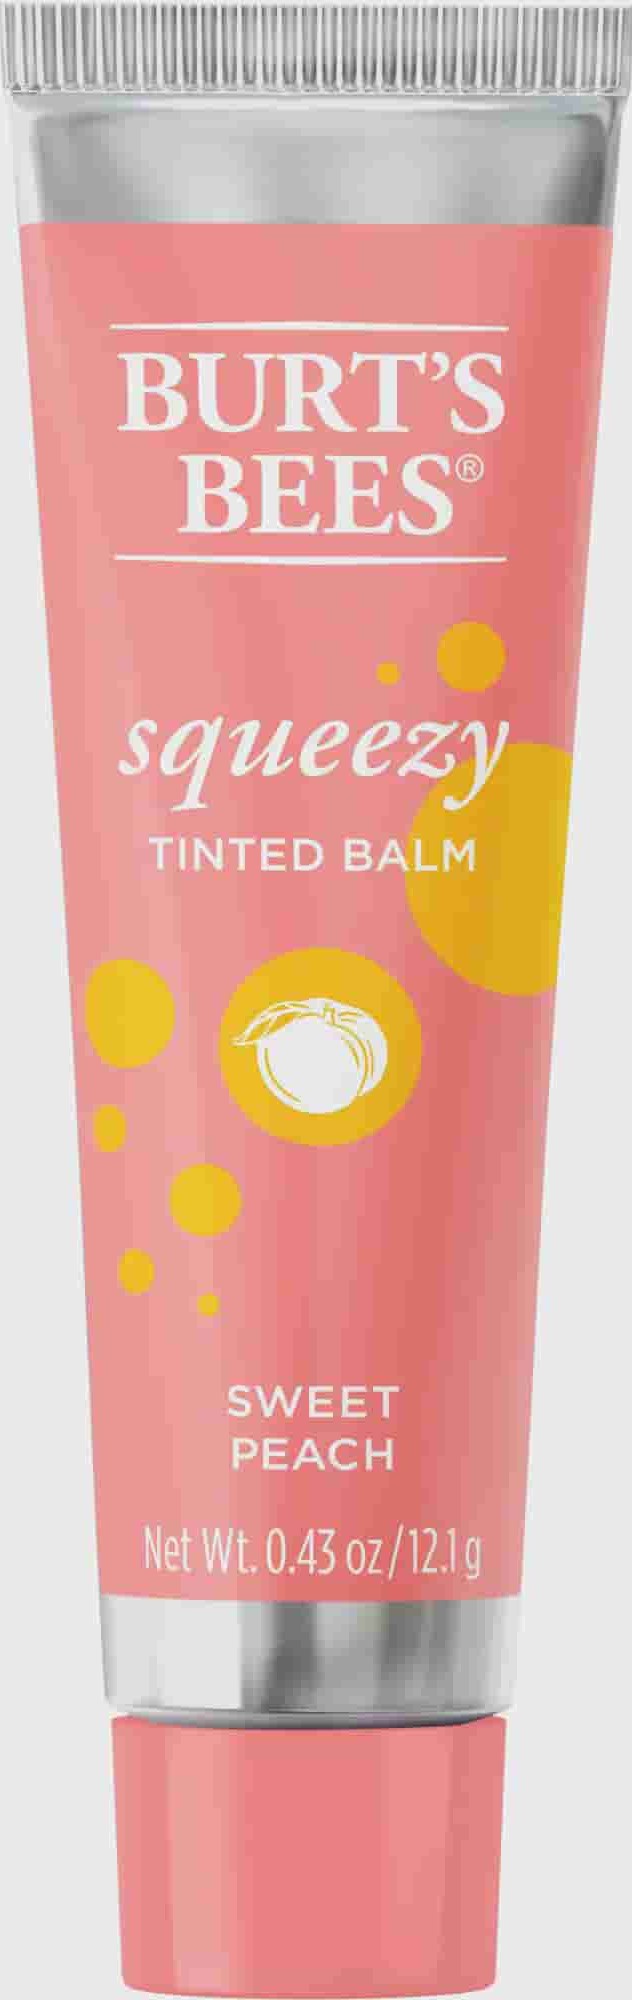 Burt's Bees Squeezy Tinted Lip Balm - Sweet Peach ingredients (Explained)